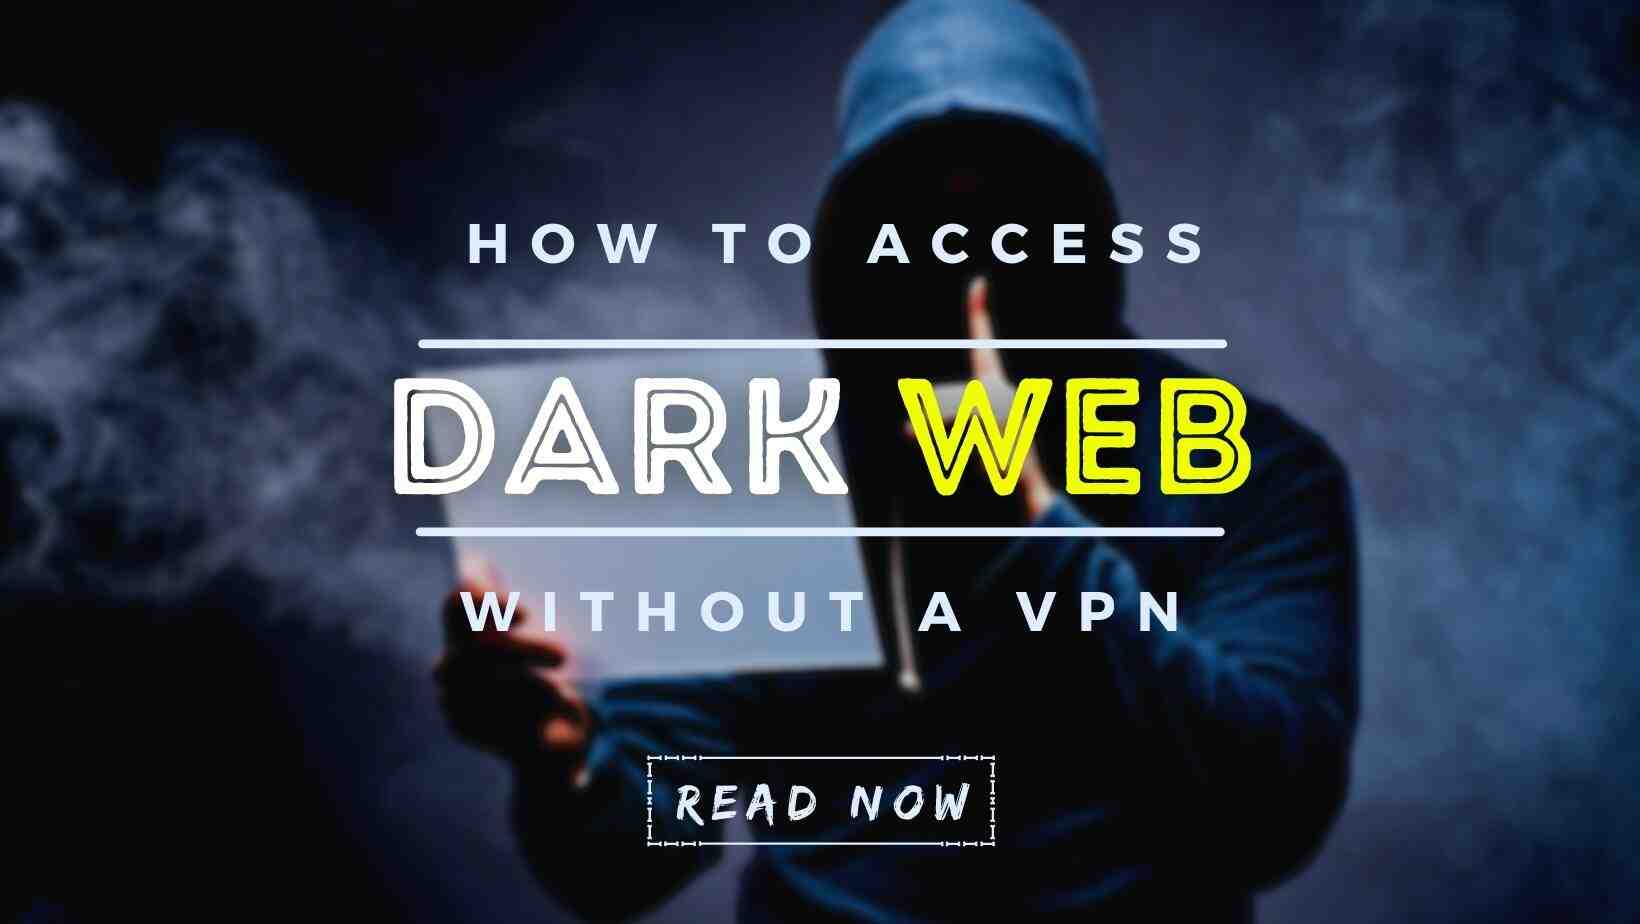 Can you access the dark web without VPN?